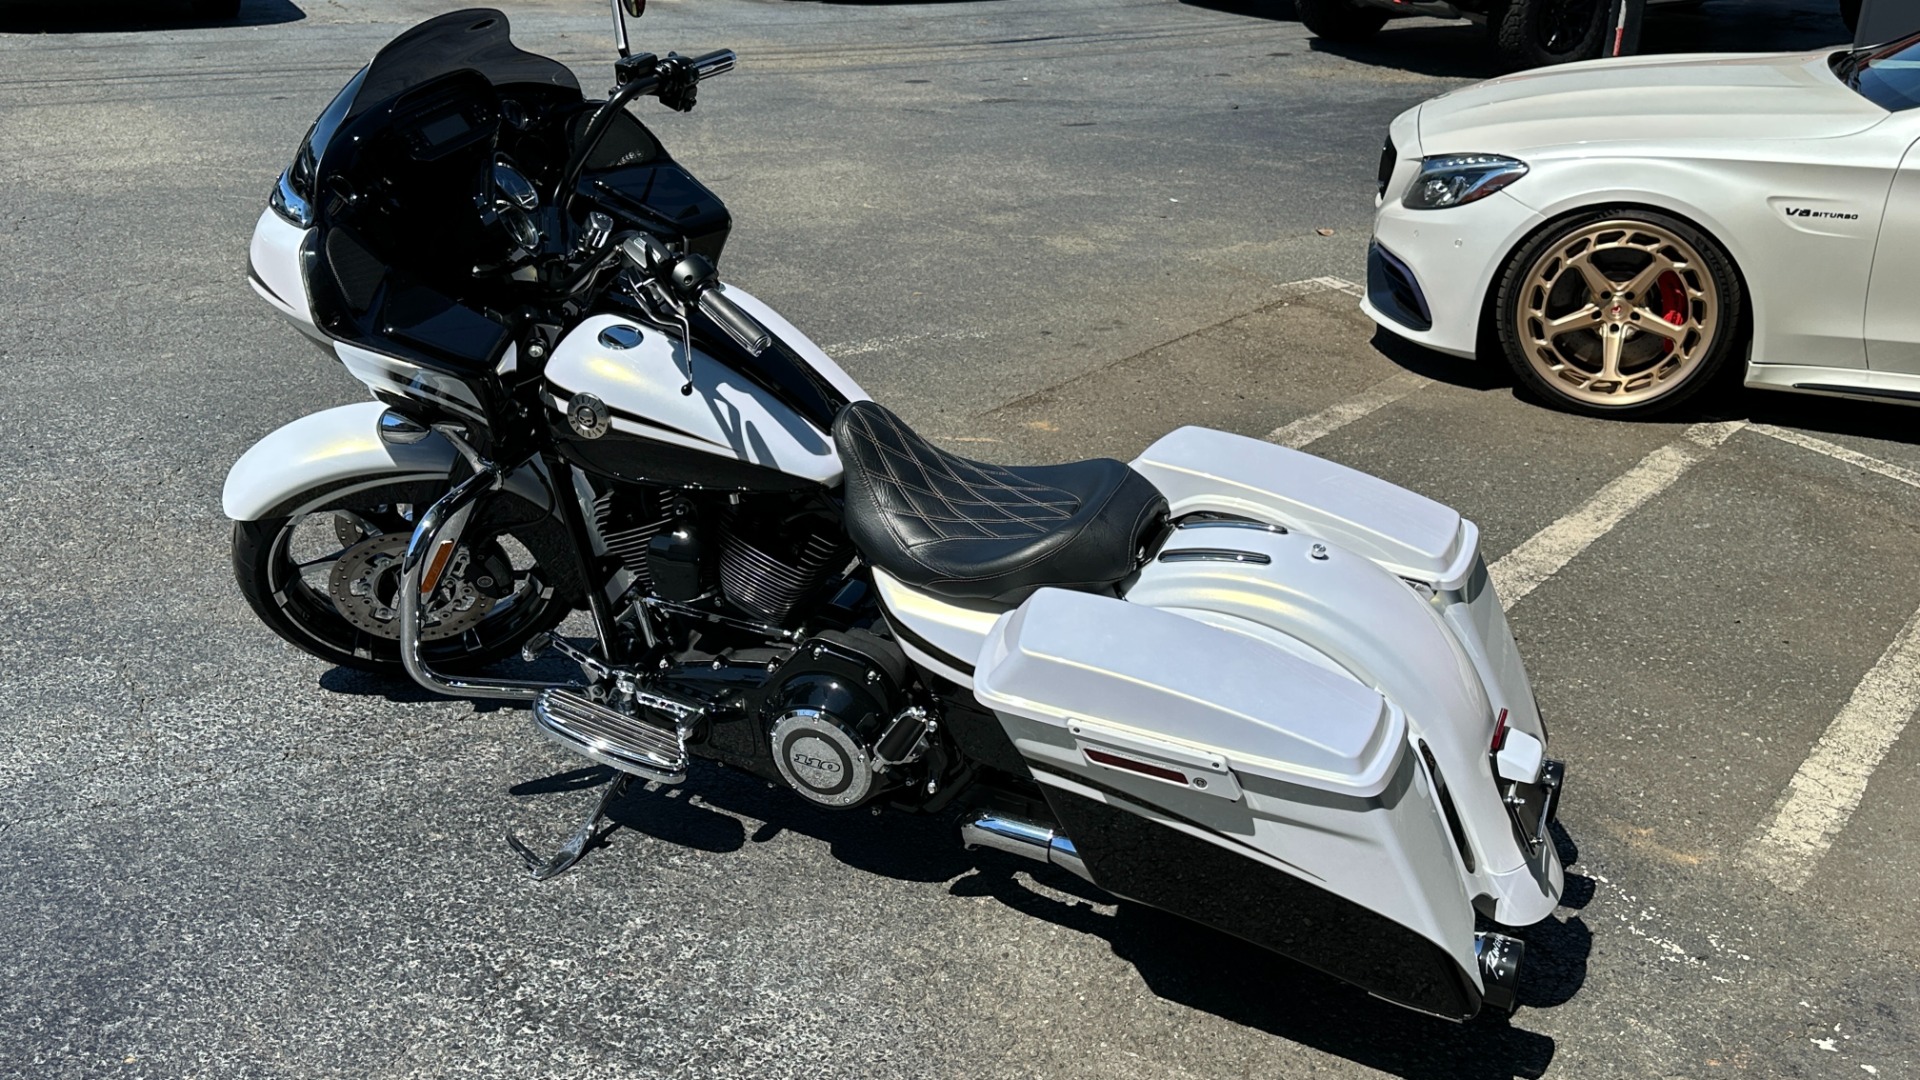 Used 2012 Harley Davidson FLTRXSE CVO Road Glide Custom CVO PAINT / RINEHART EXHAUST / SCREAMING EAGLE 110 ENGINE for sale $32,000 at Formula Imports in Charlotte NC 28227 6